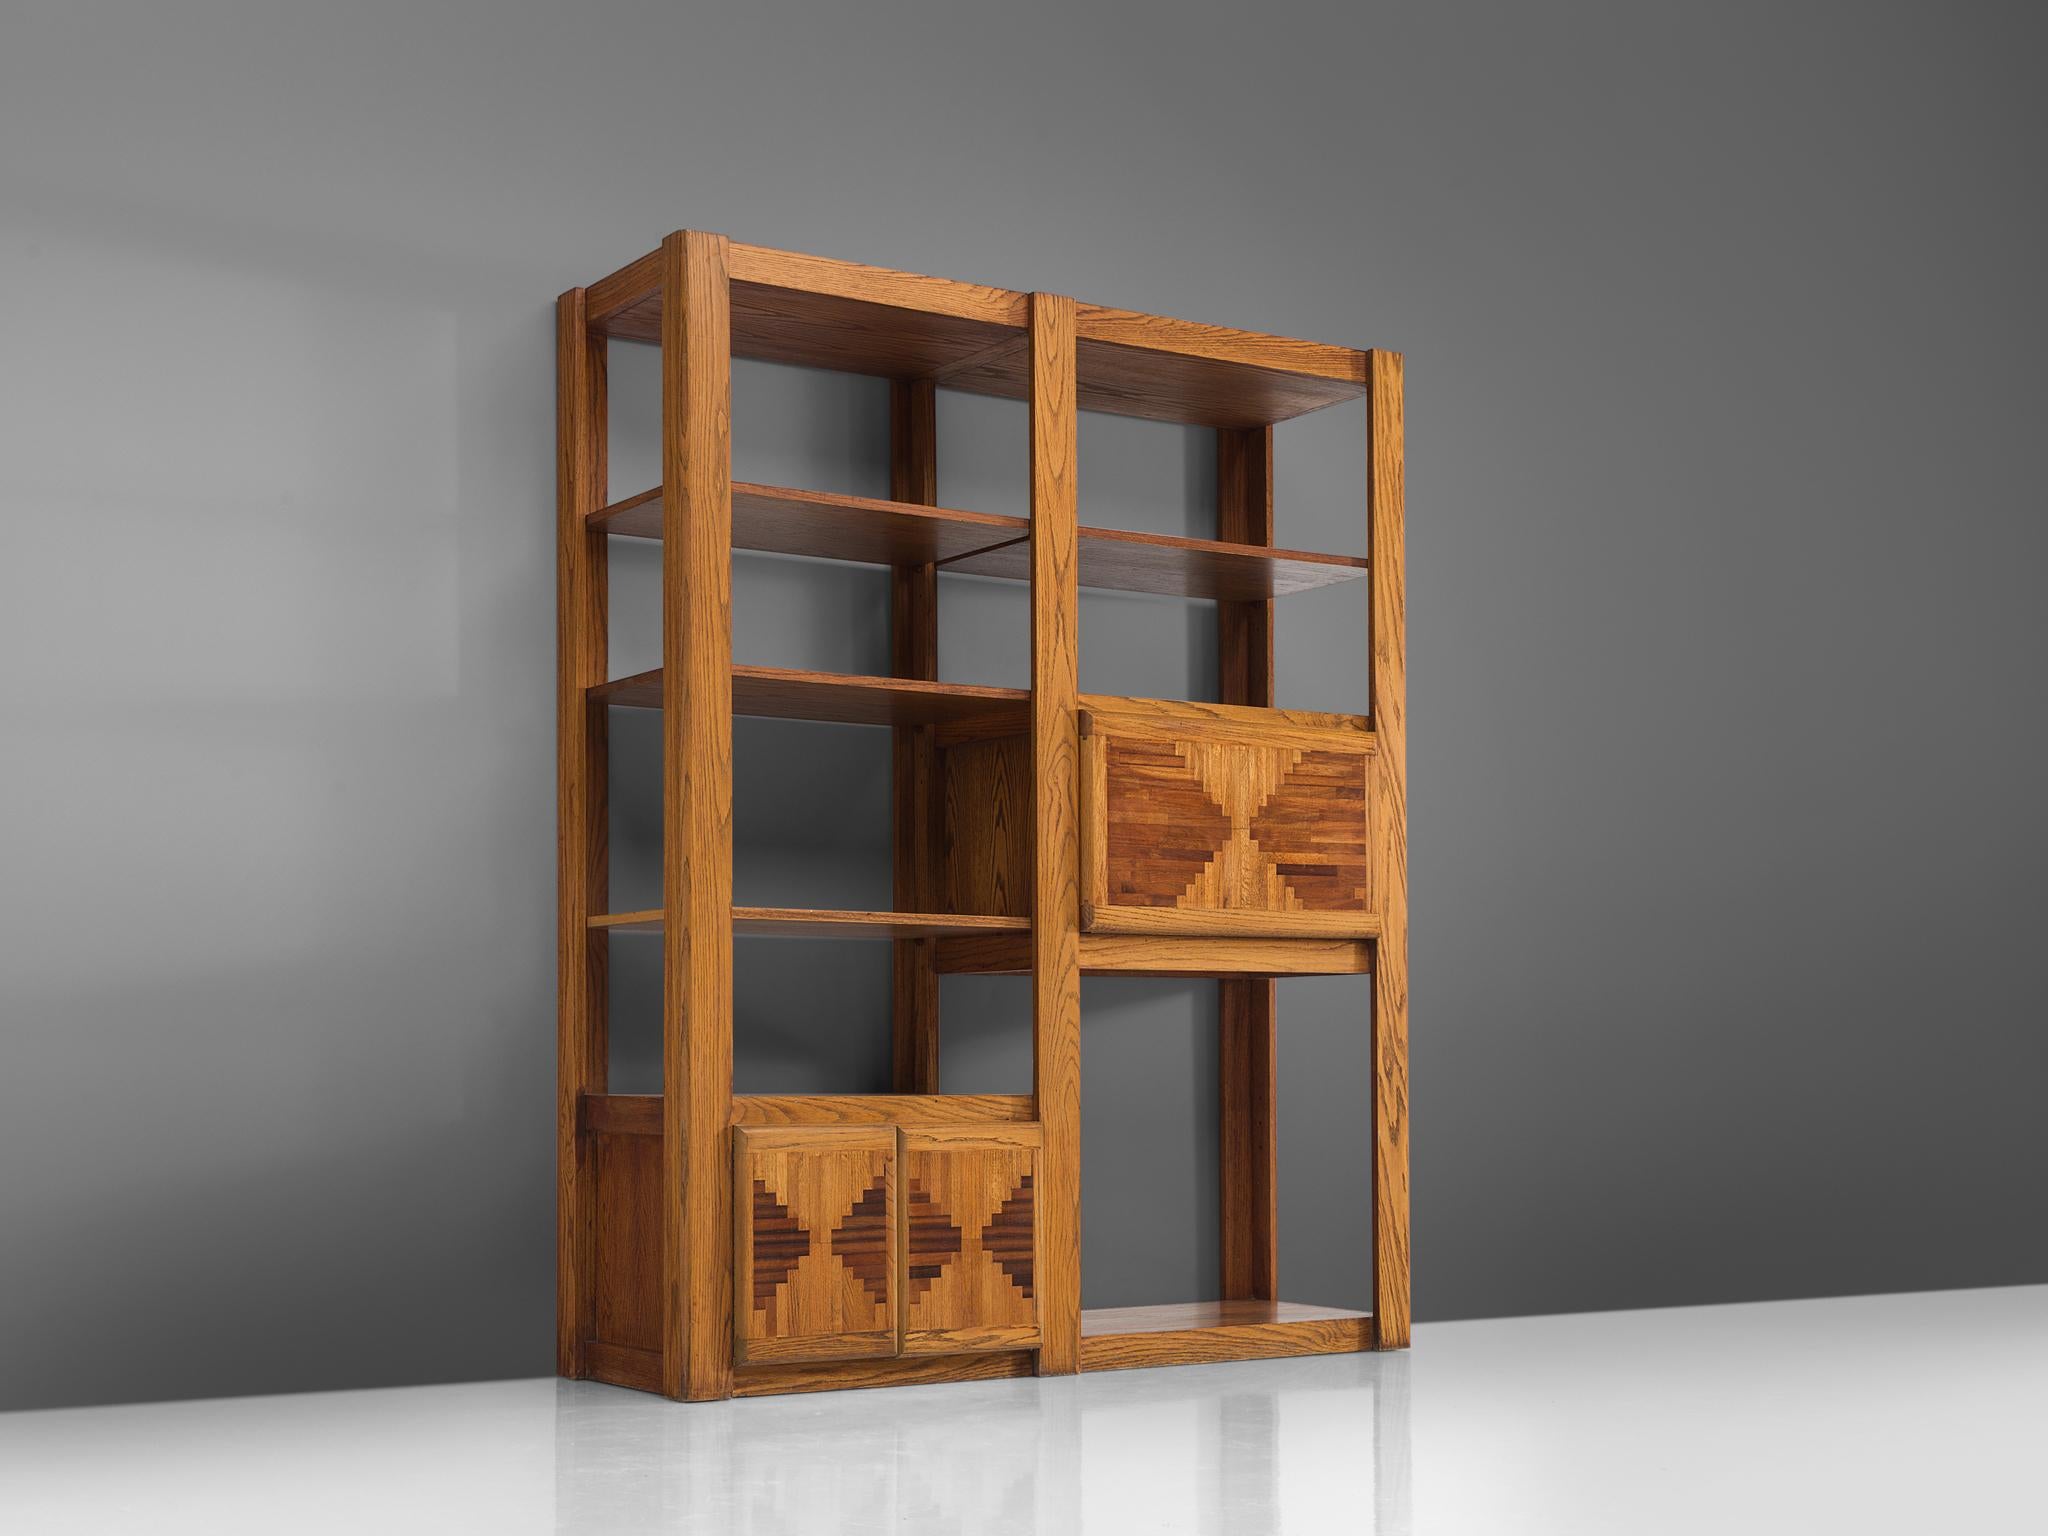 Bookshelf, oak, Italy, 1950s

This grand custom-made open shelf was made in the 1950s. The design of this original cabinet shows two cabinets with inlayed doors. Two columns feature multiple shelves. The bottom cabinet has two doors and the top